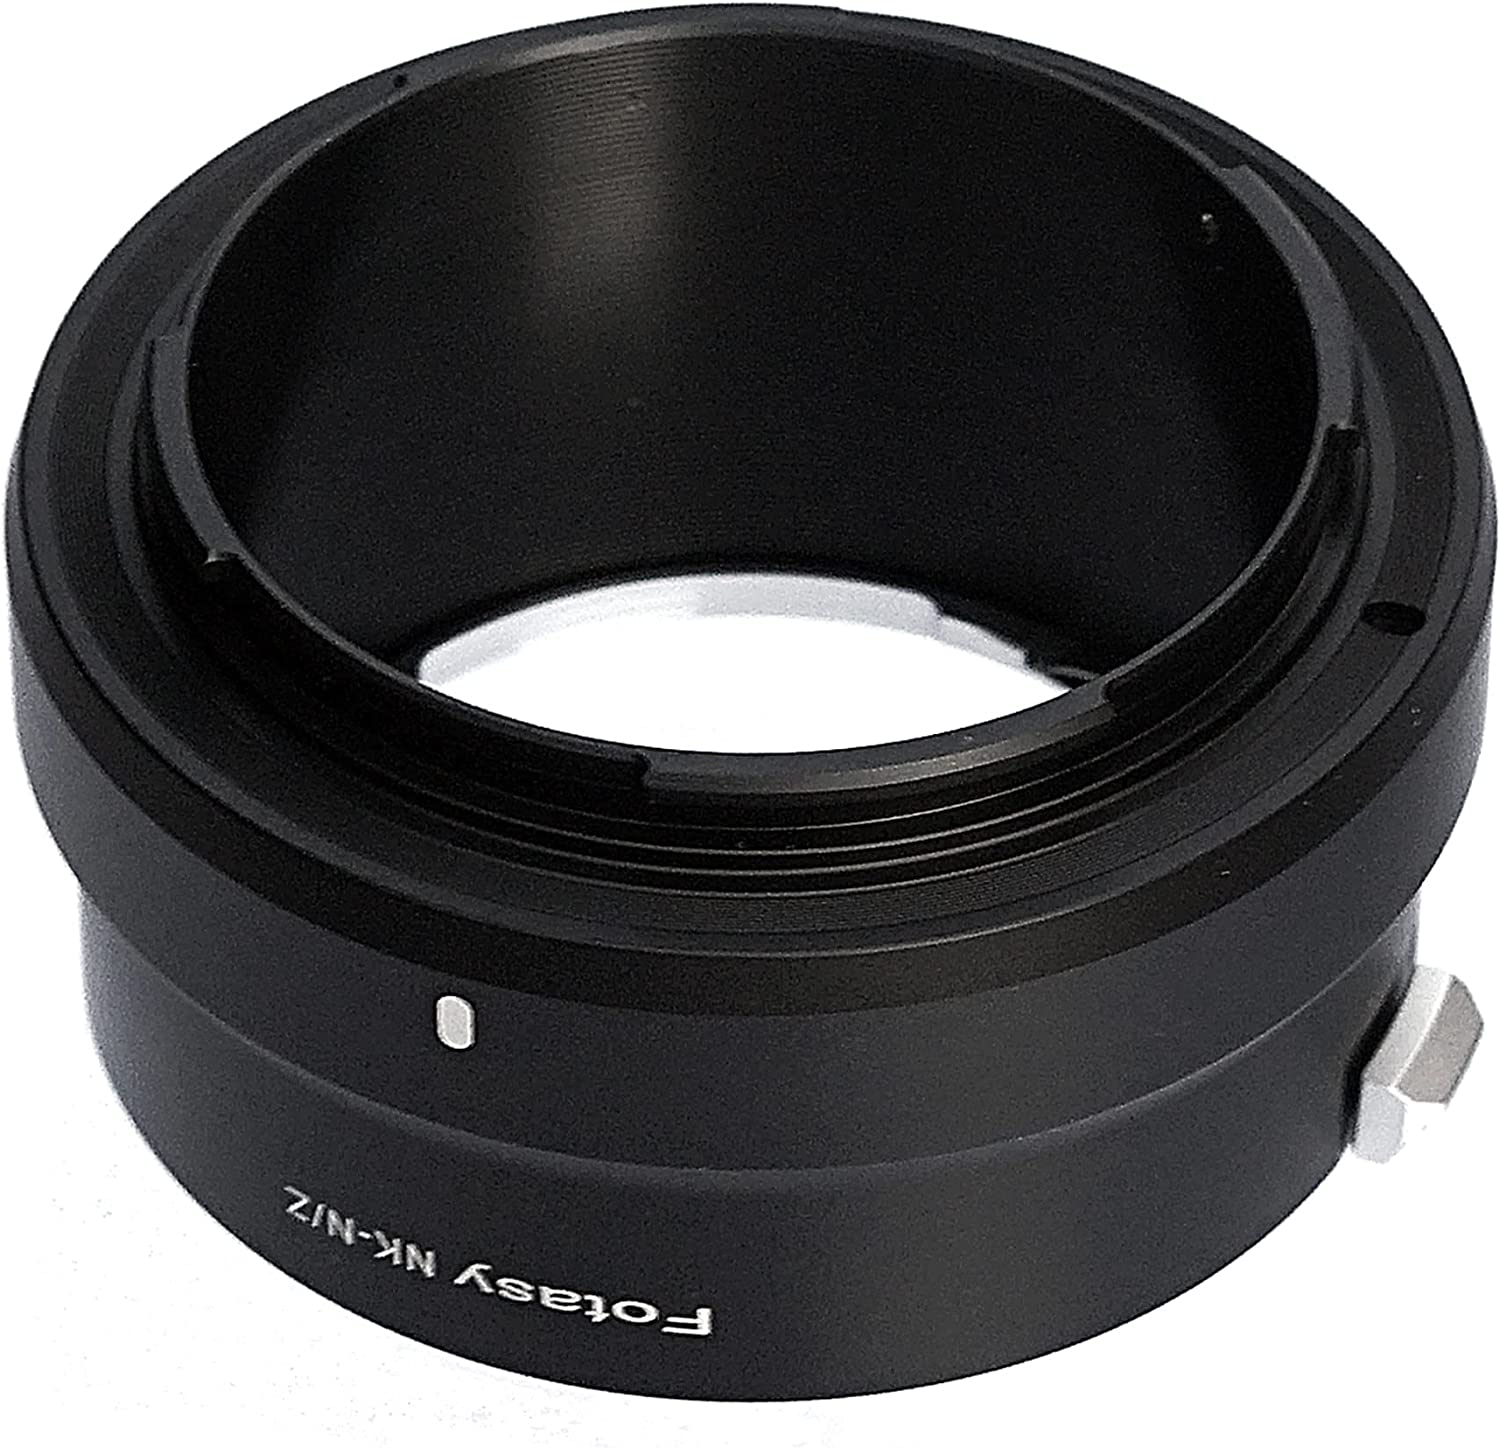 This Fotasy Nikon F to Z mount adapter costs only $16.29 - Nikon 